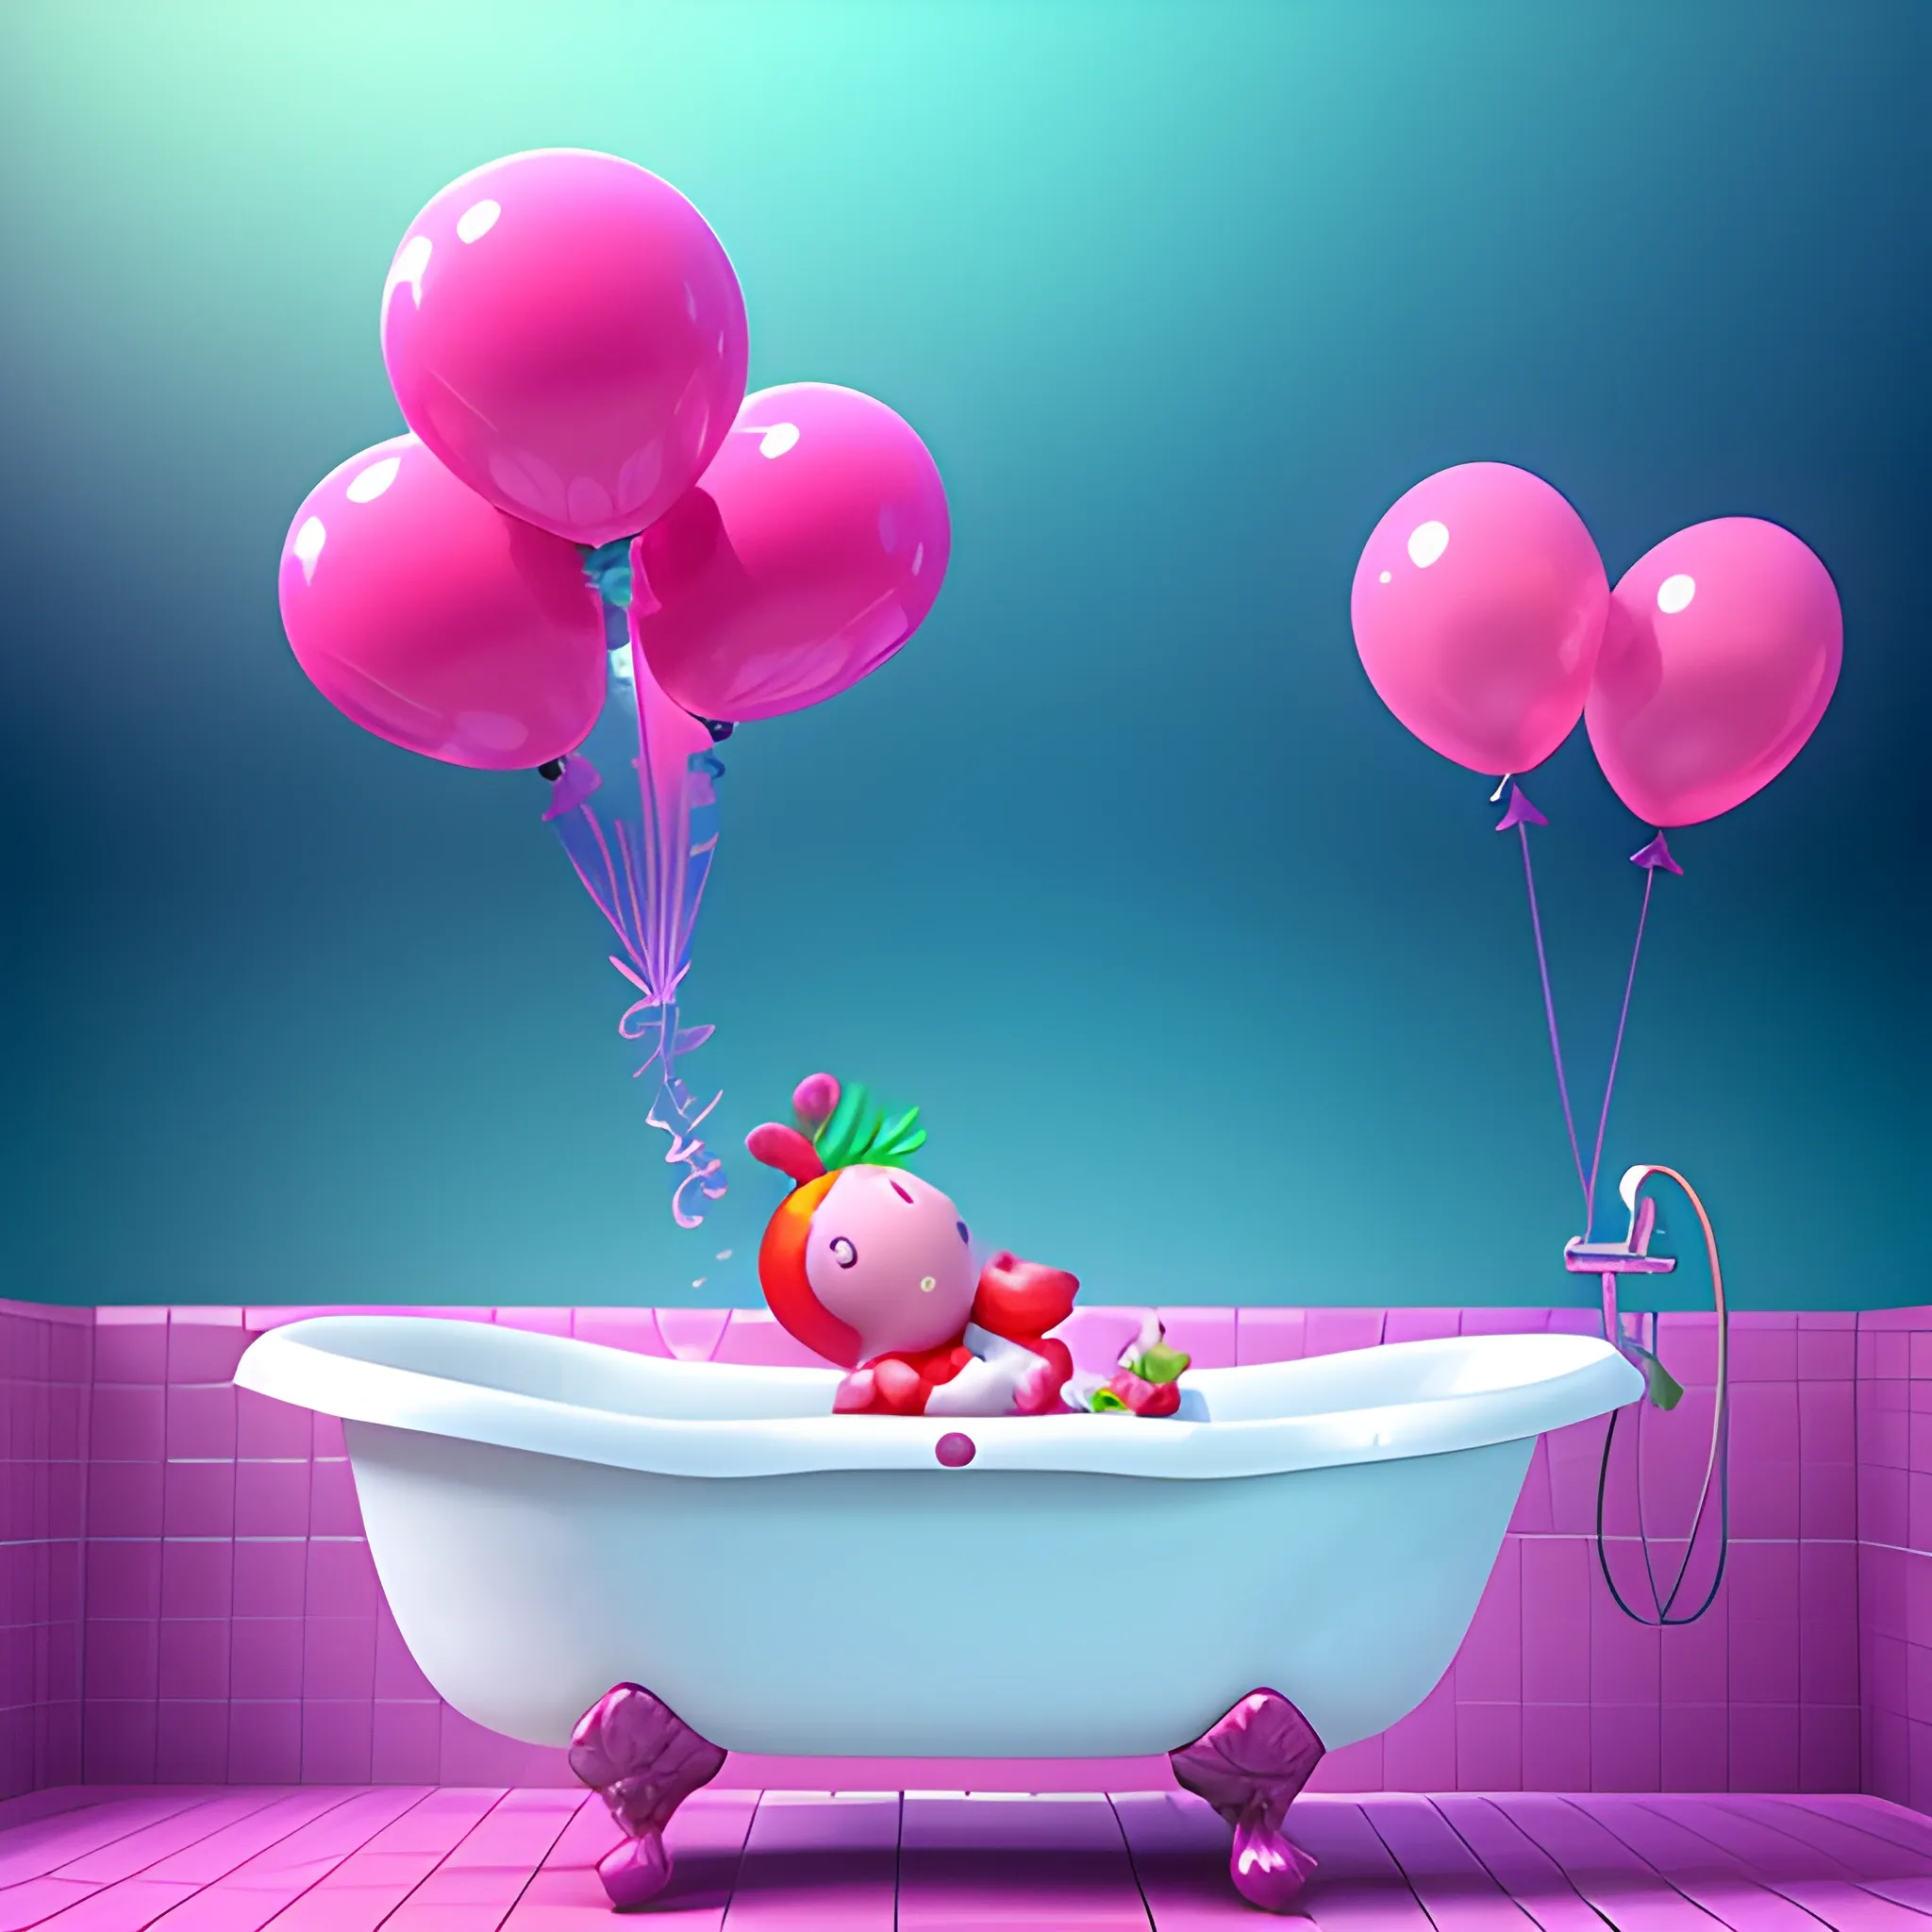 A huge red strawberry is relaxing into a bathtub, pink purple light blue and green bubbles, colorful balloons in the air, saturated colors, 3d ZBrush, CGI unreal engine, whimsical details, Cartoon,